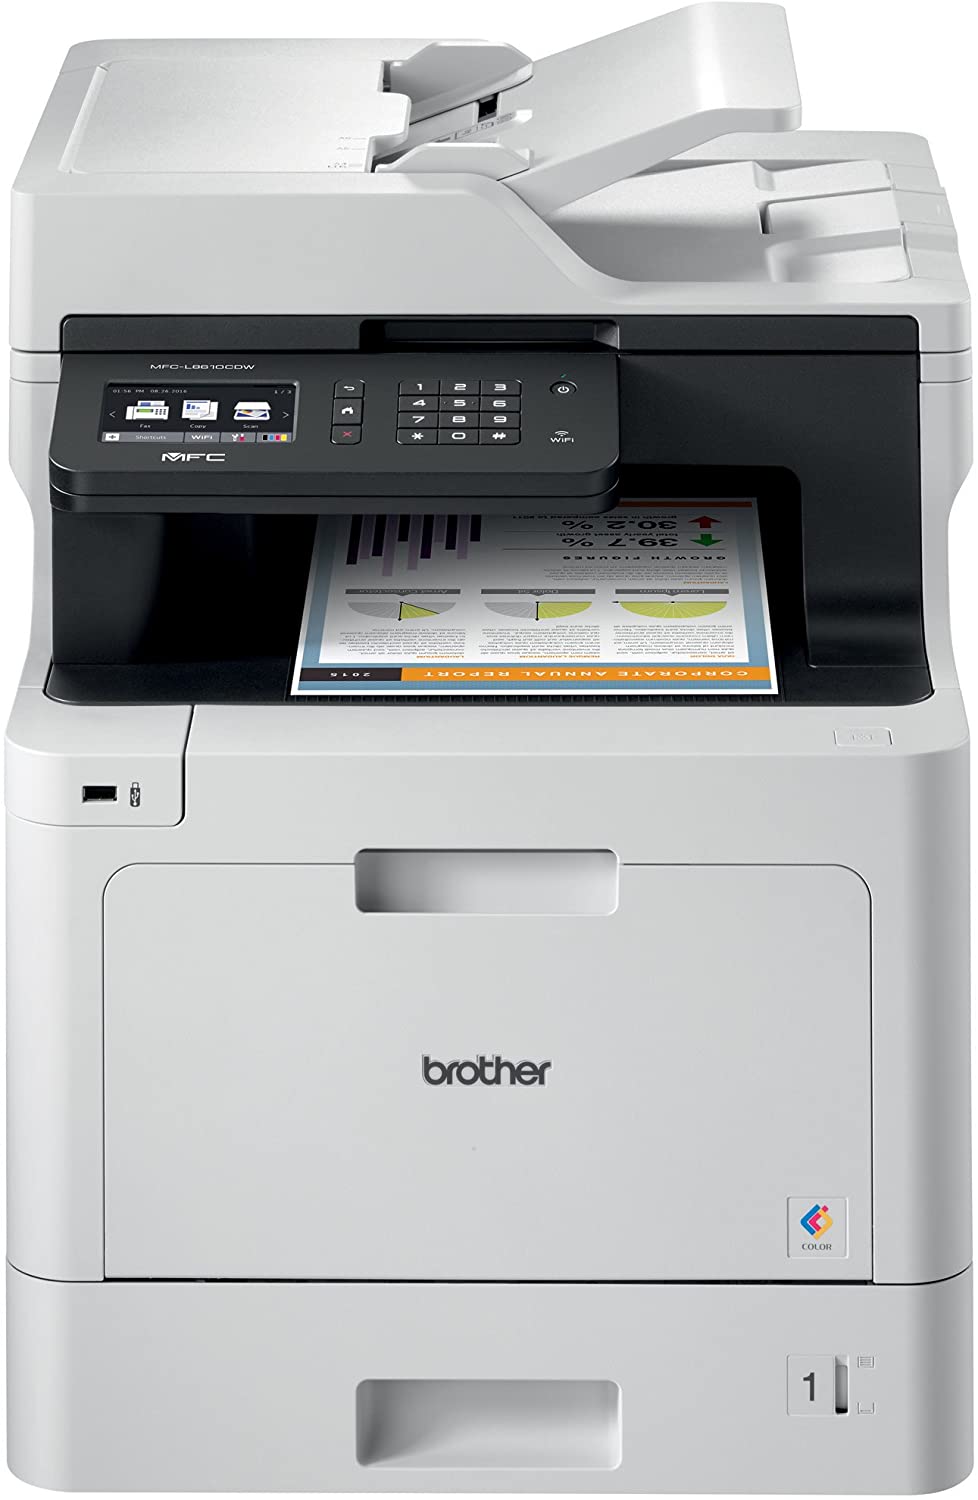 Brother Color Laser Printer, Multifunction Printer, All-in-One Printer, MFC-L8610CDW, Wireless Networking, Automatic Duplex Printing, Mobile Printing and Scanning, Amazon Dash Replenishment Ready